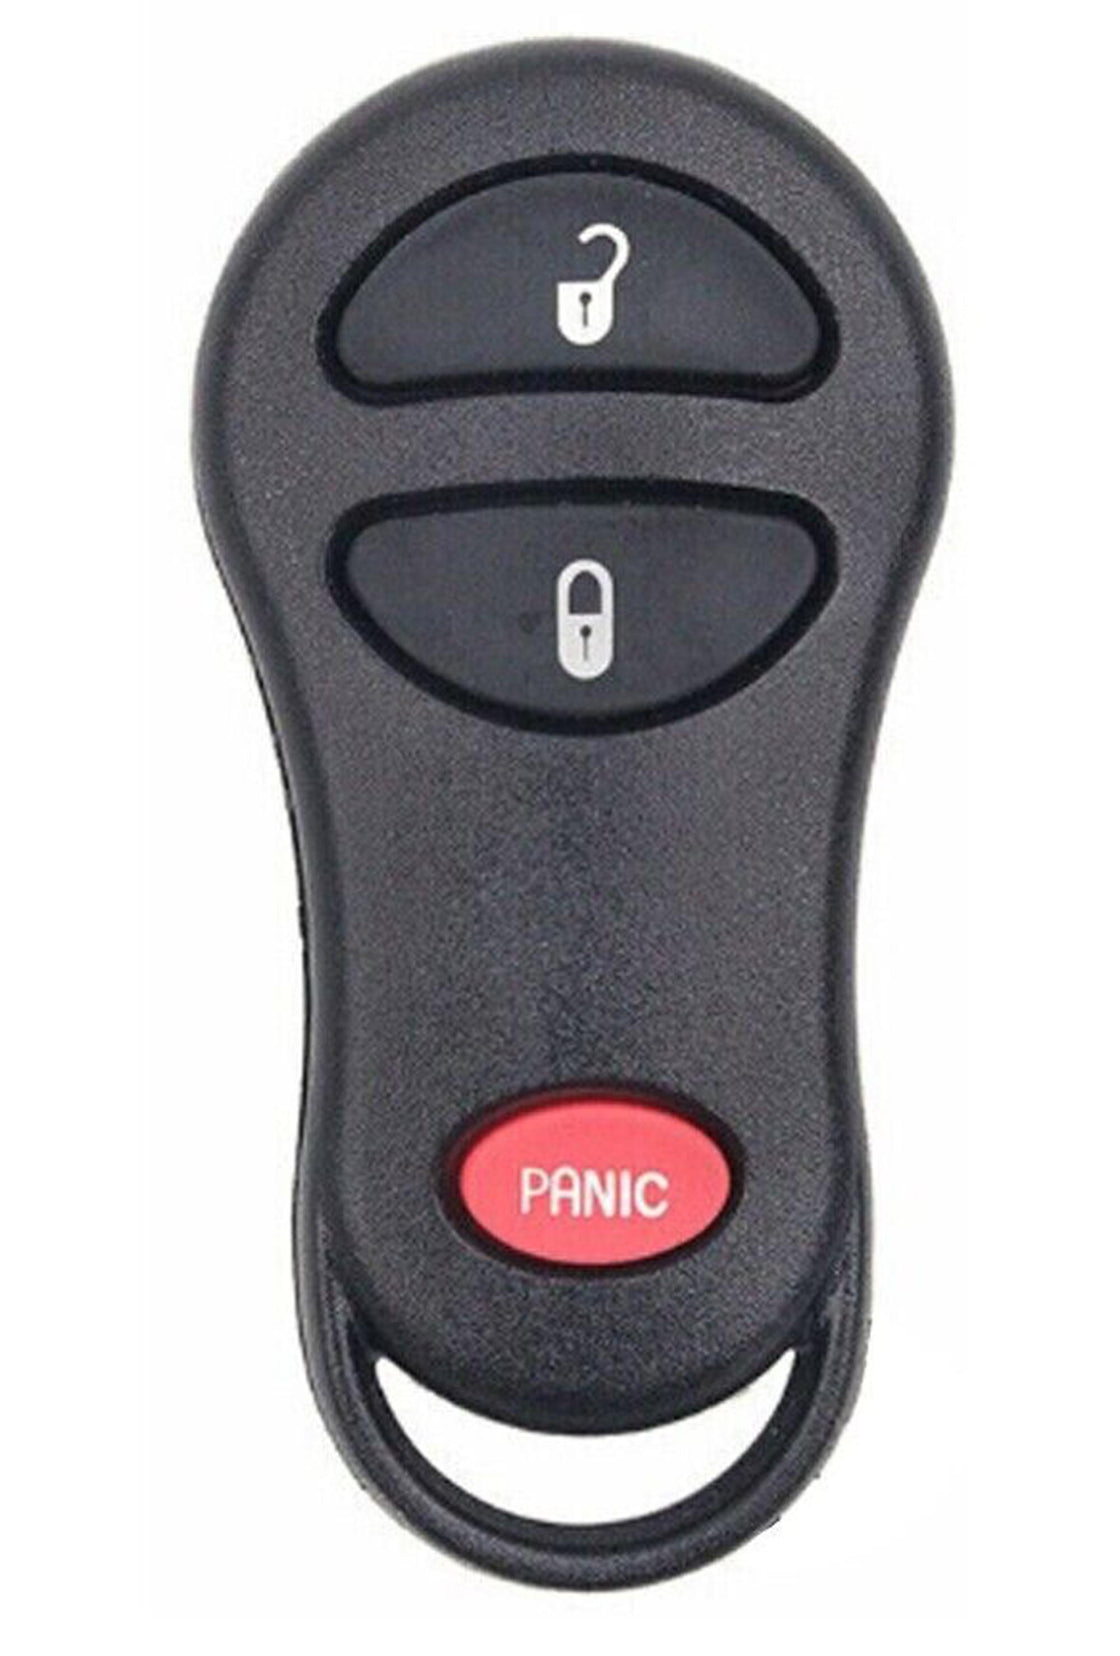 1999 Plymouth Voyager Replacement Key Fob Remote